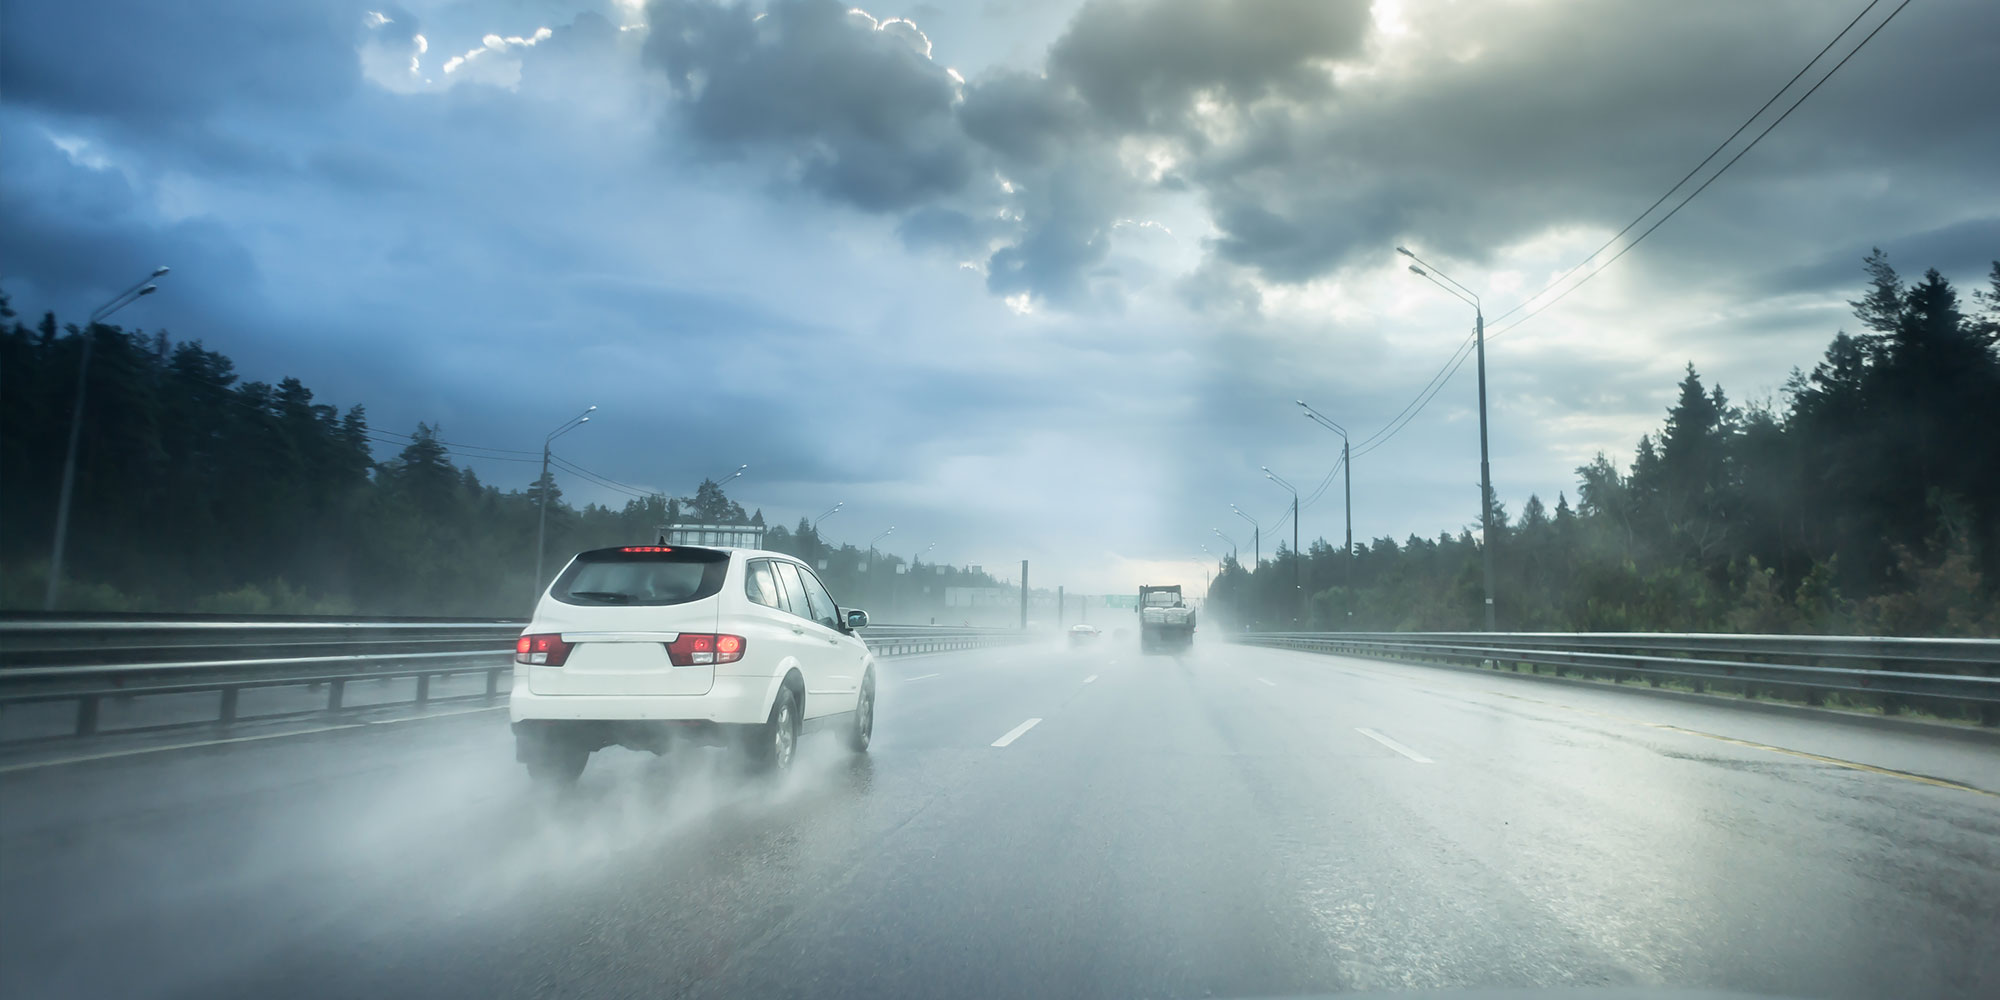 Bad Weather? Utah Law says “Drive Below the Speed Limit”